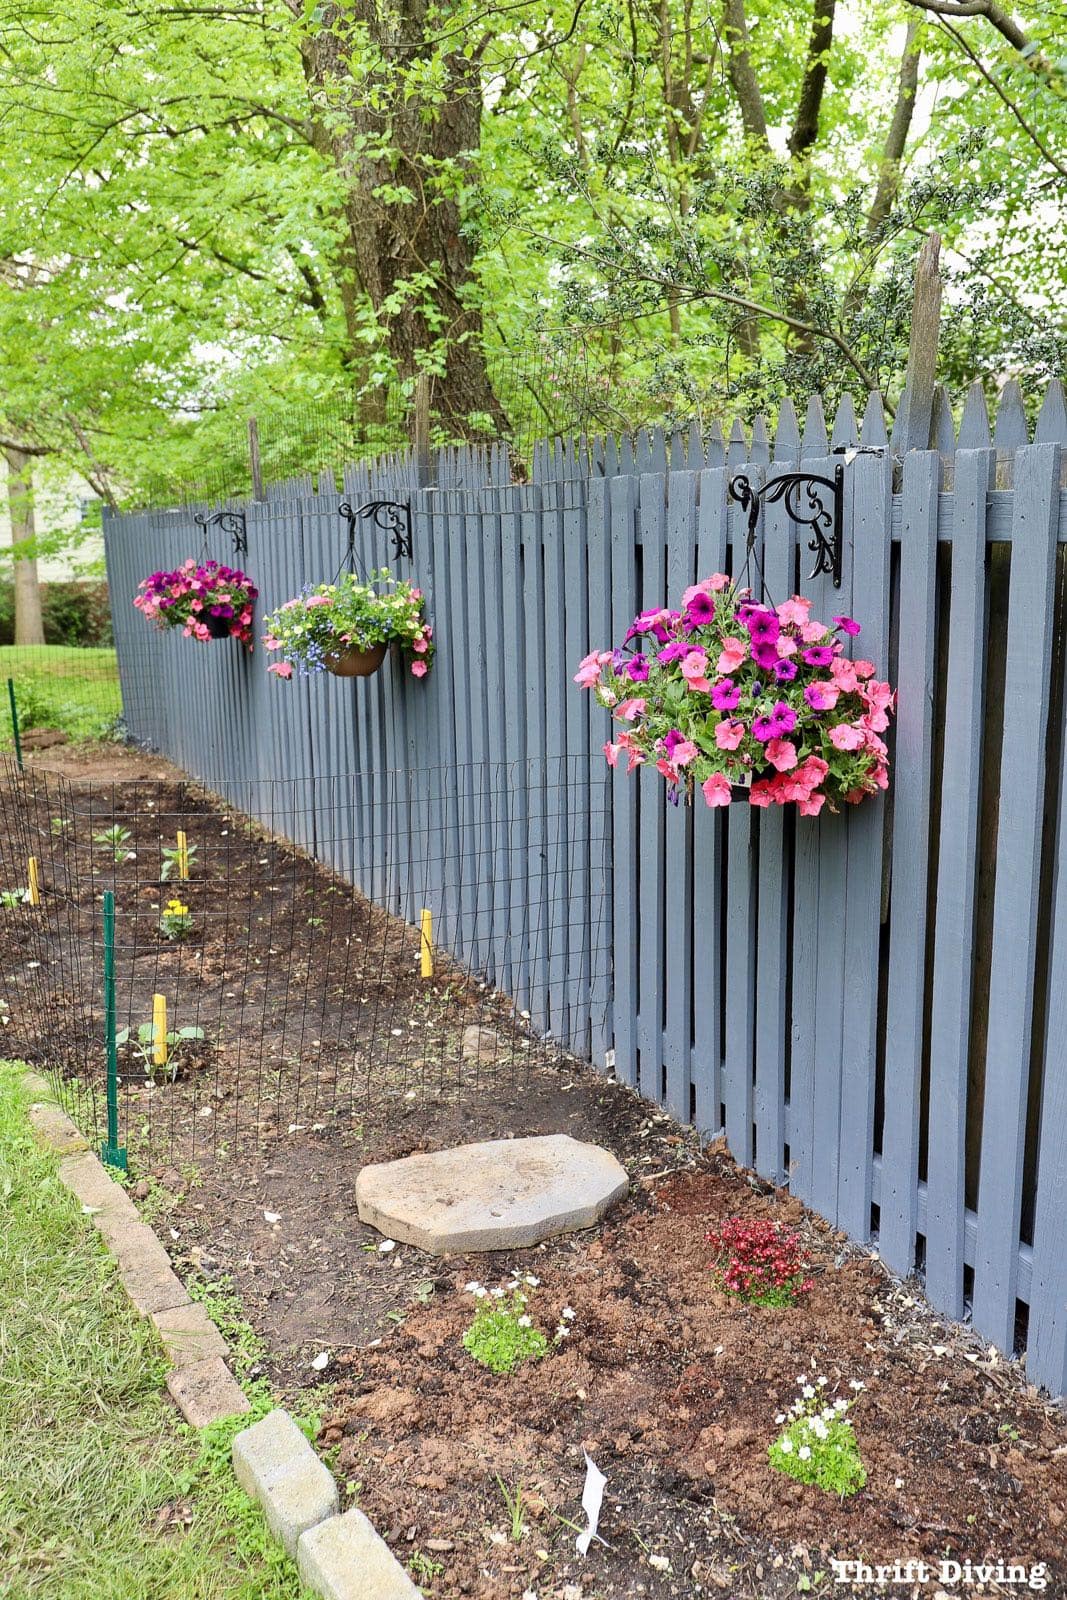 How to Use a Paint Sprayer to Paint a Wood Fence - Pretty blue fence makeover with a garden and flowers. - Thrift Diving